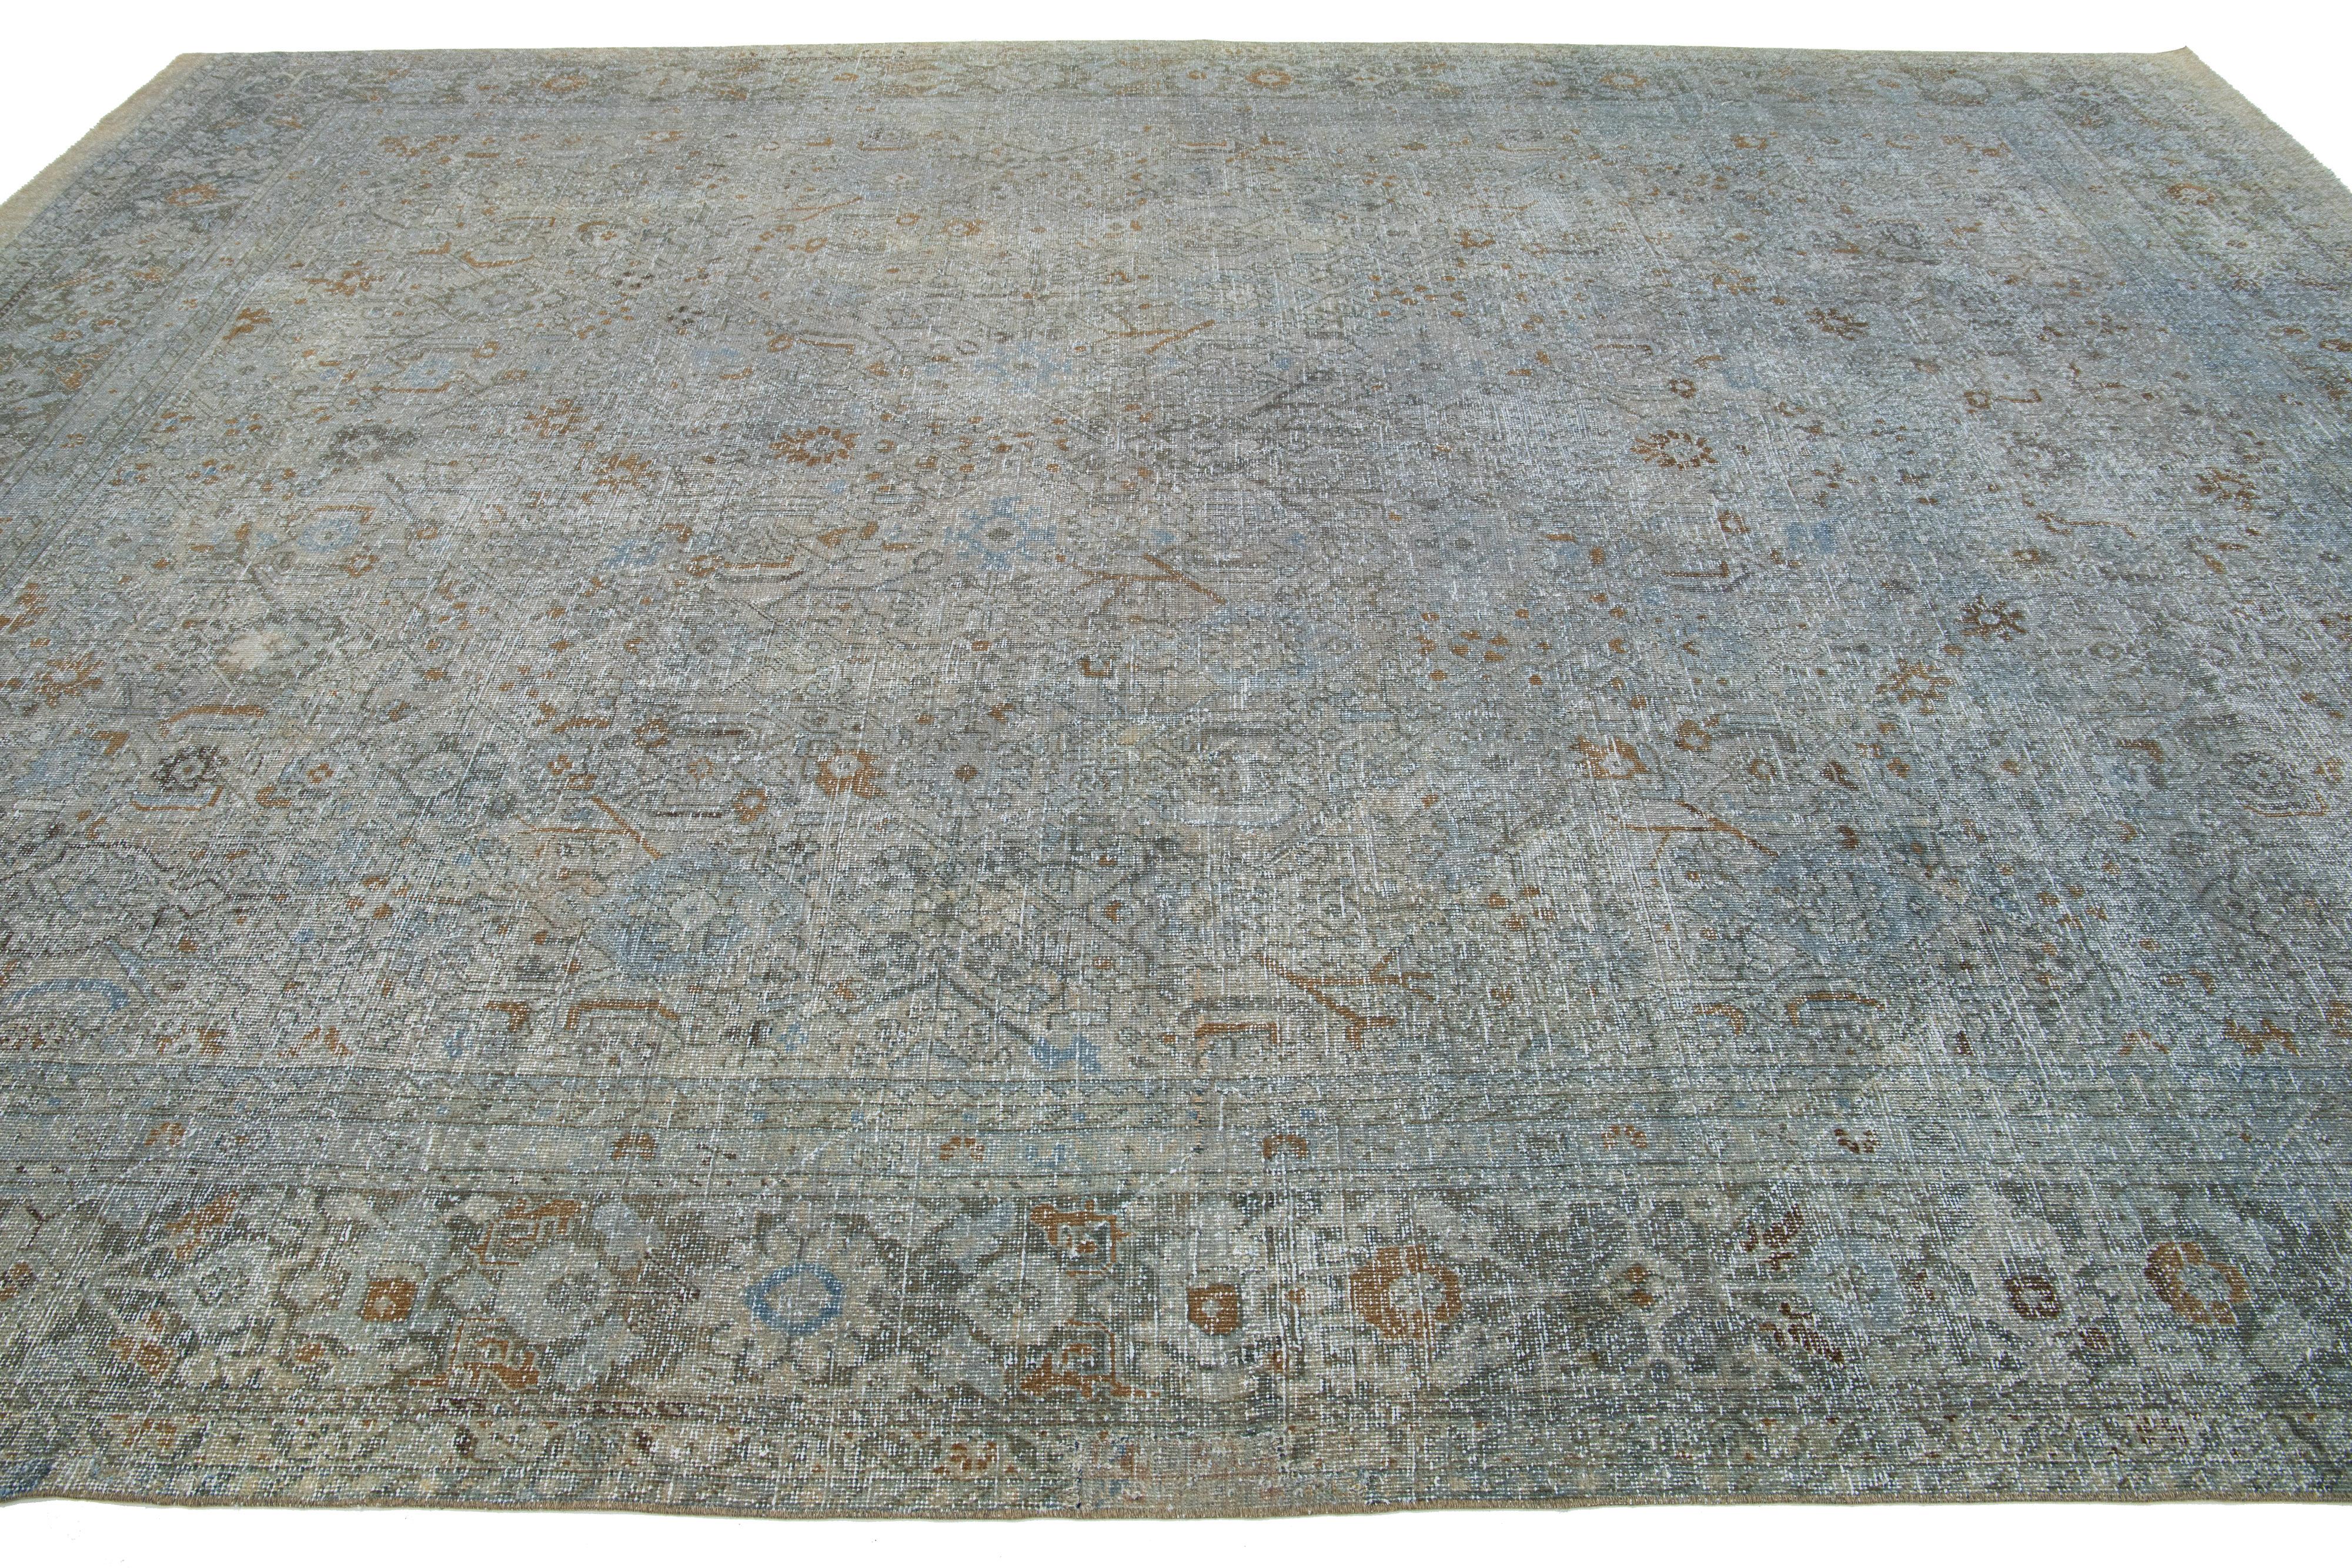 19th Century Antique Persian Tabriz Wool Rug with Allover Design In Gray For Sale 1